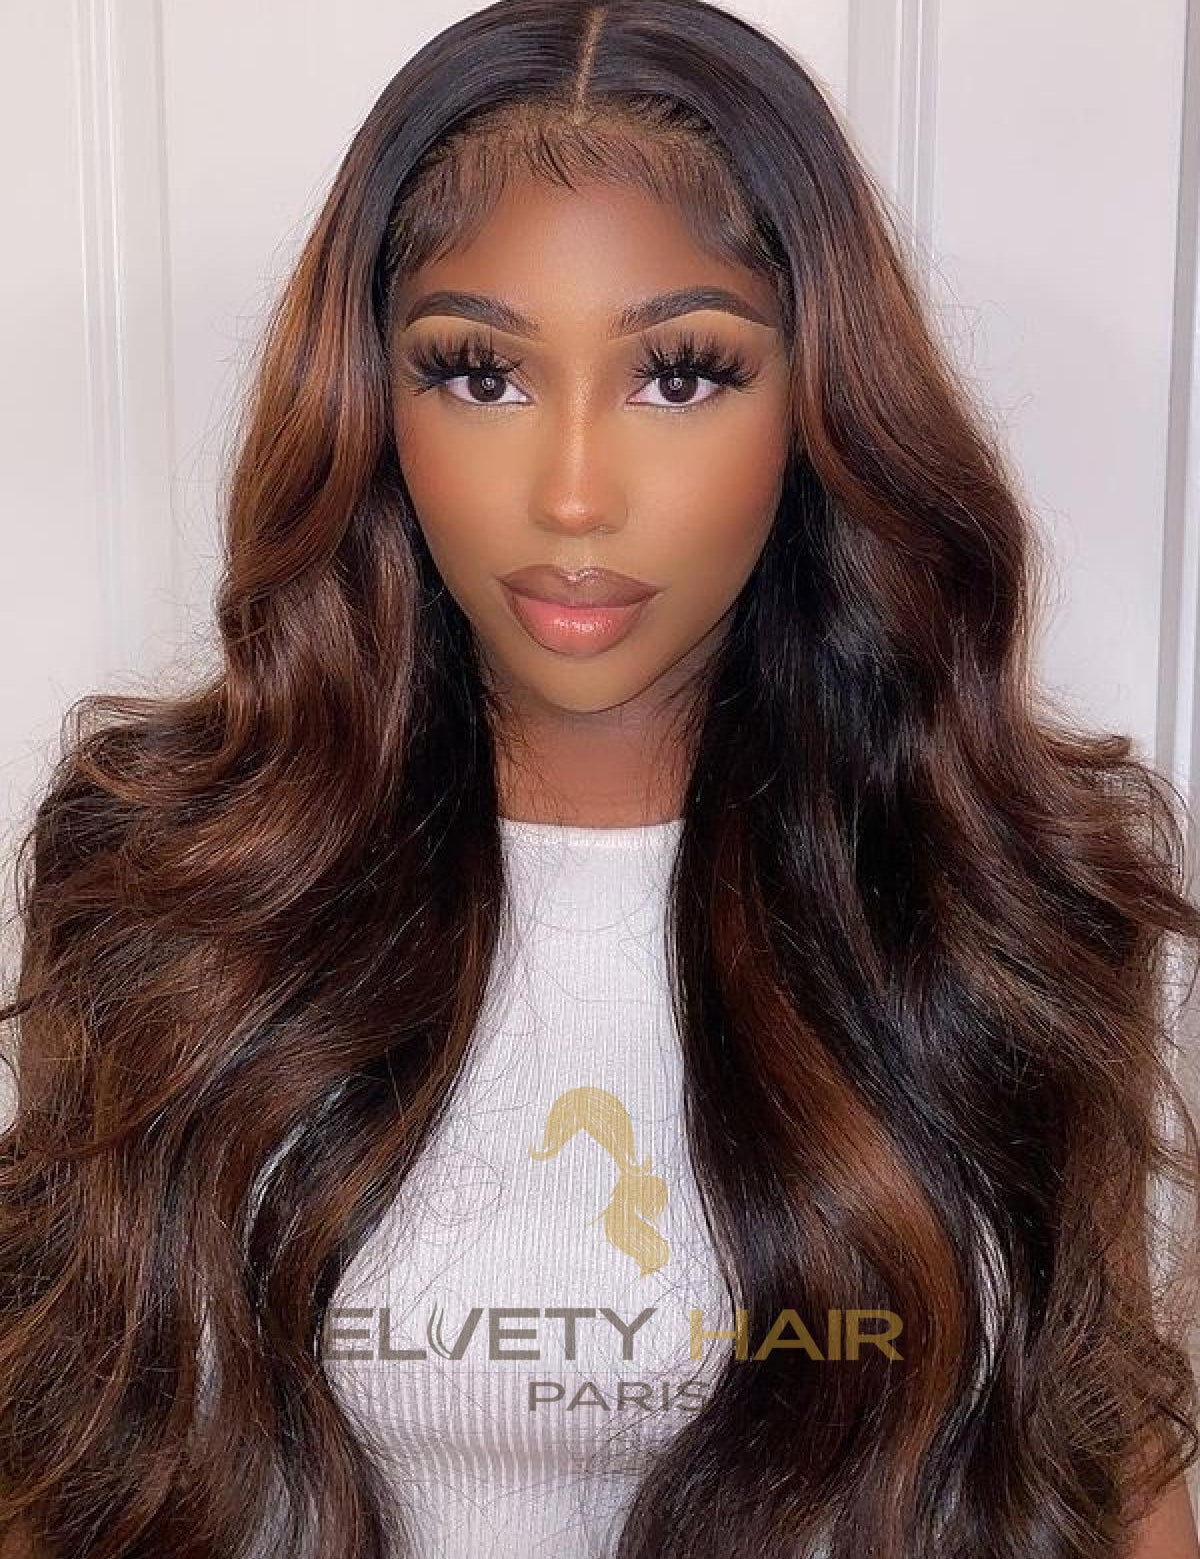 Perruque Lace Closure Wig Becky - VELVETY PARIS